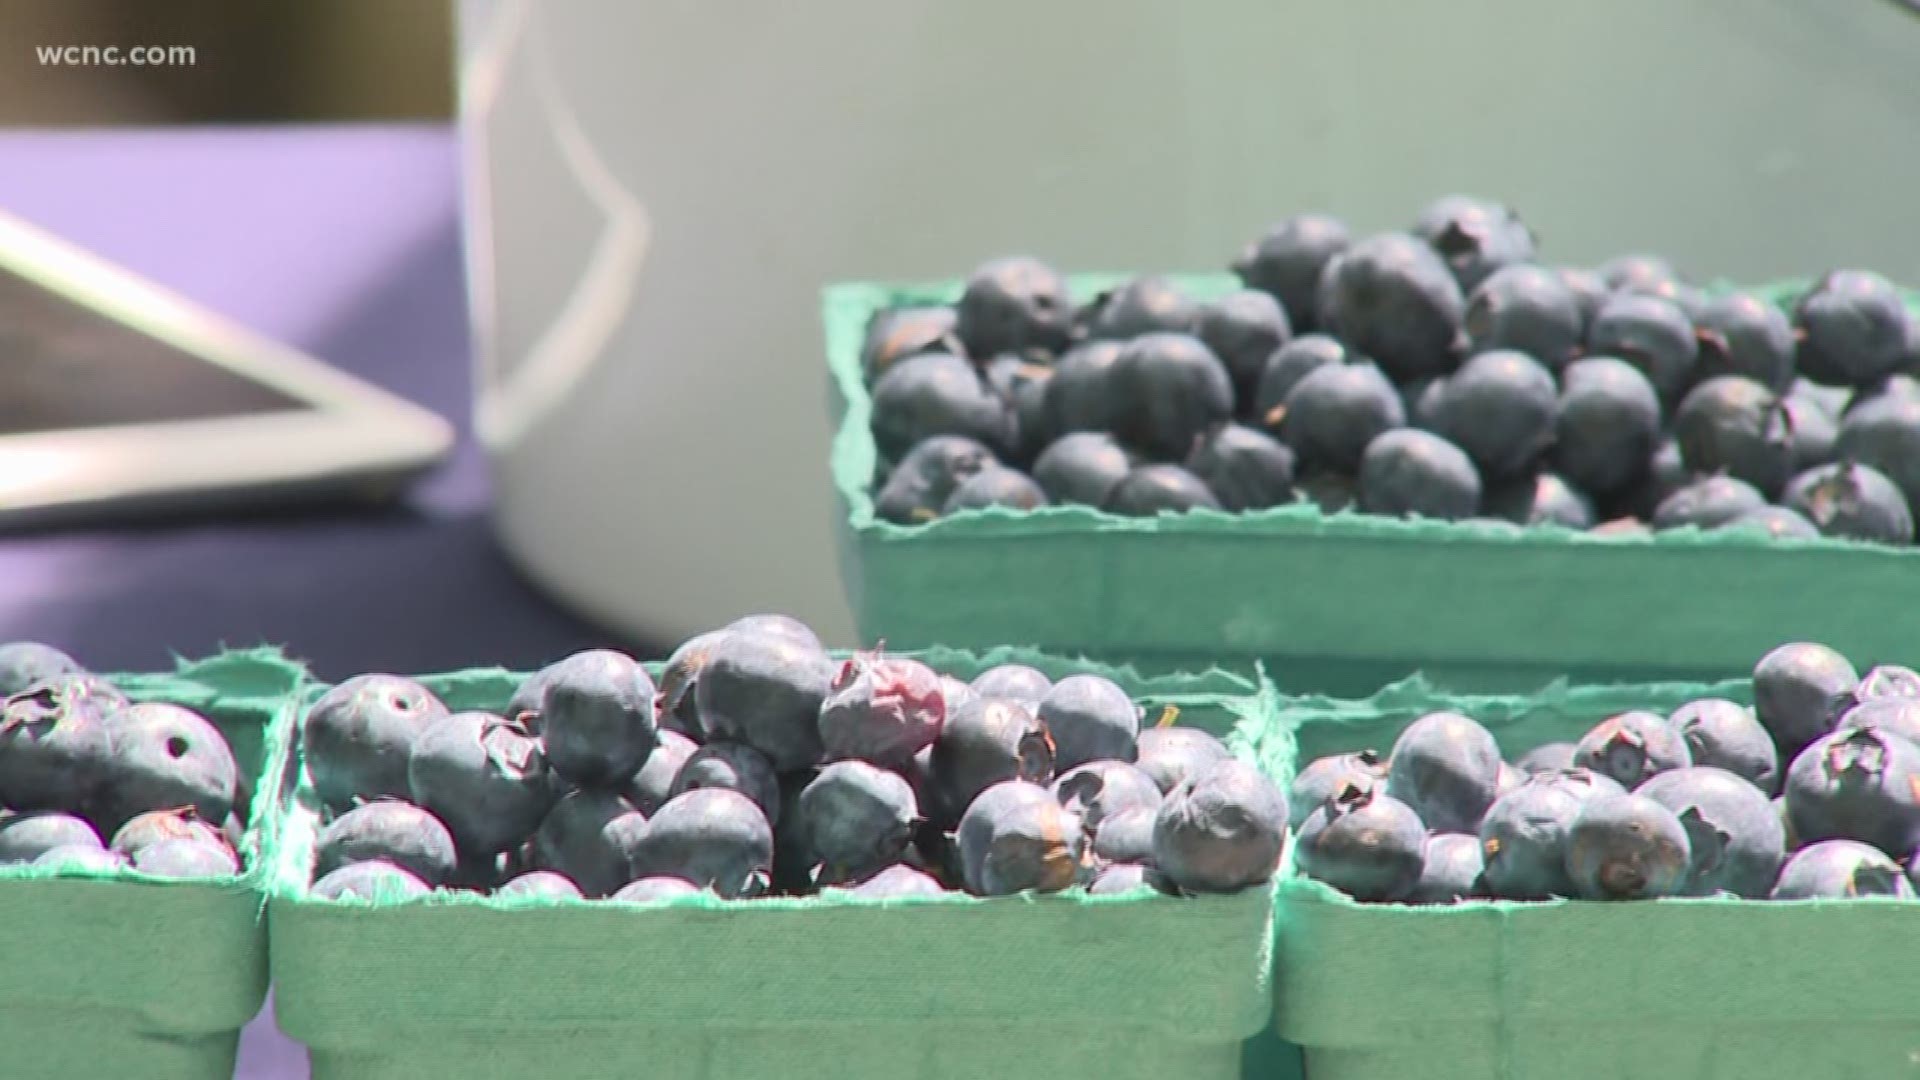 Blueberries are high in vitamin-c and antioxidants plus they’re considered a super fruit! They’re in season right now which makes them even more delicious.